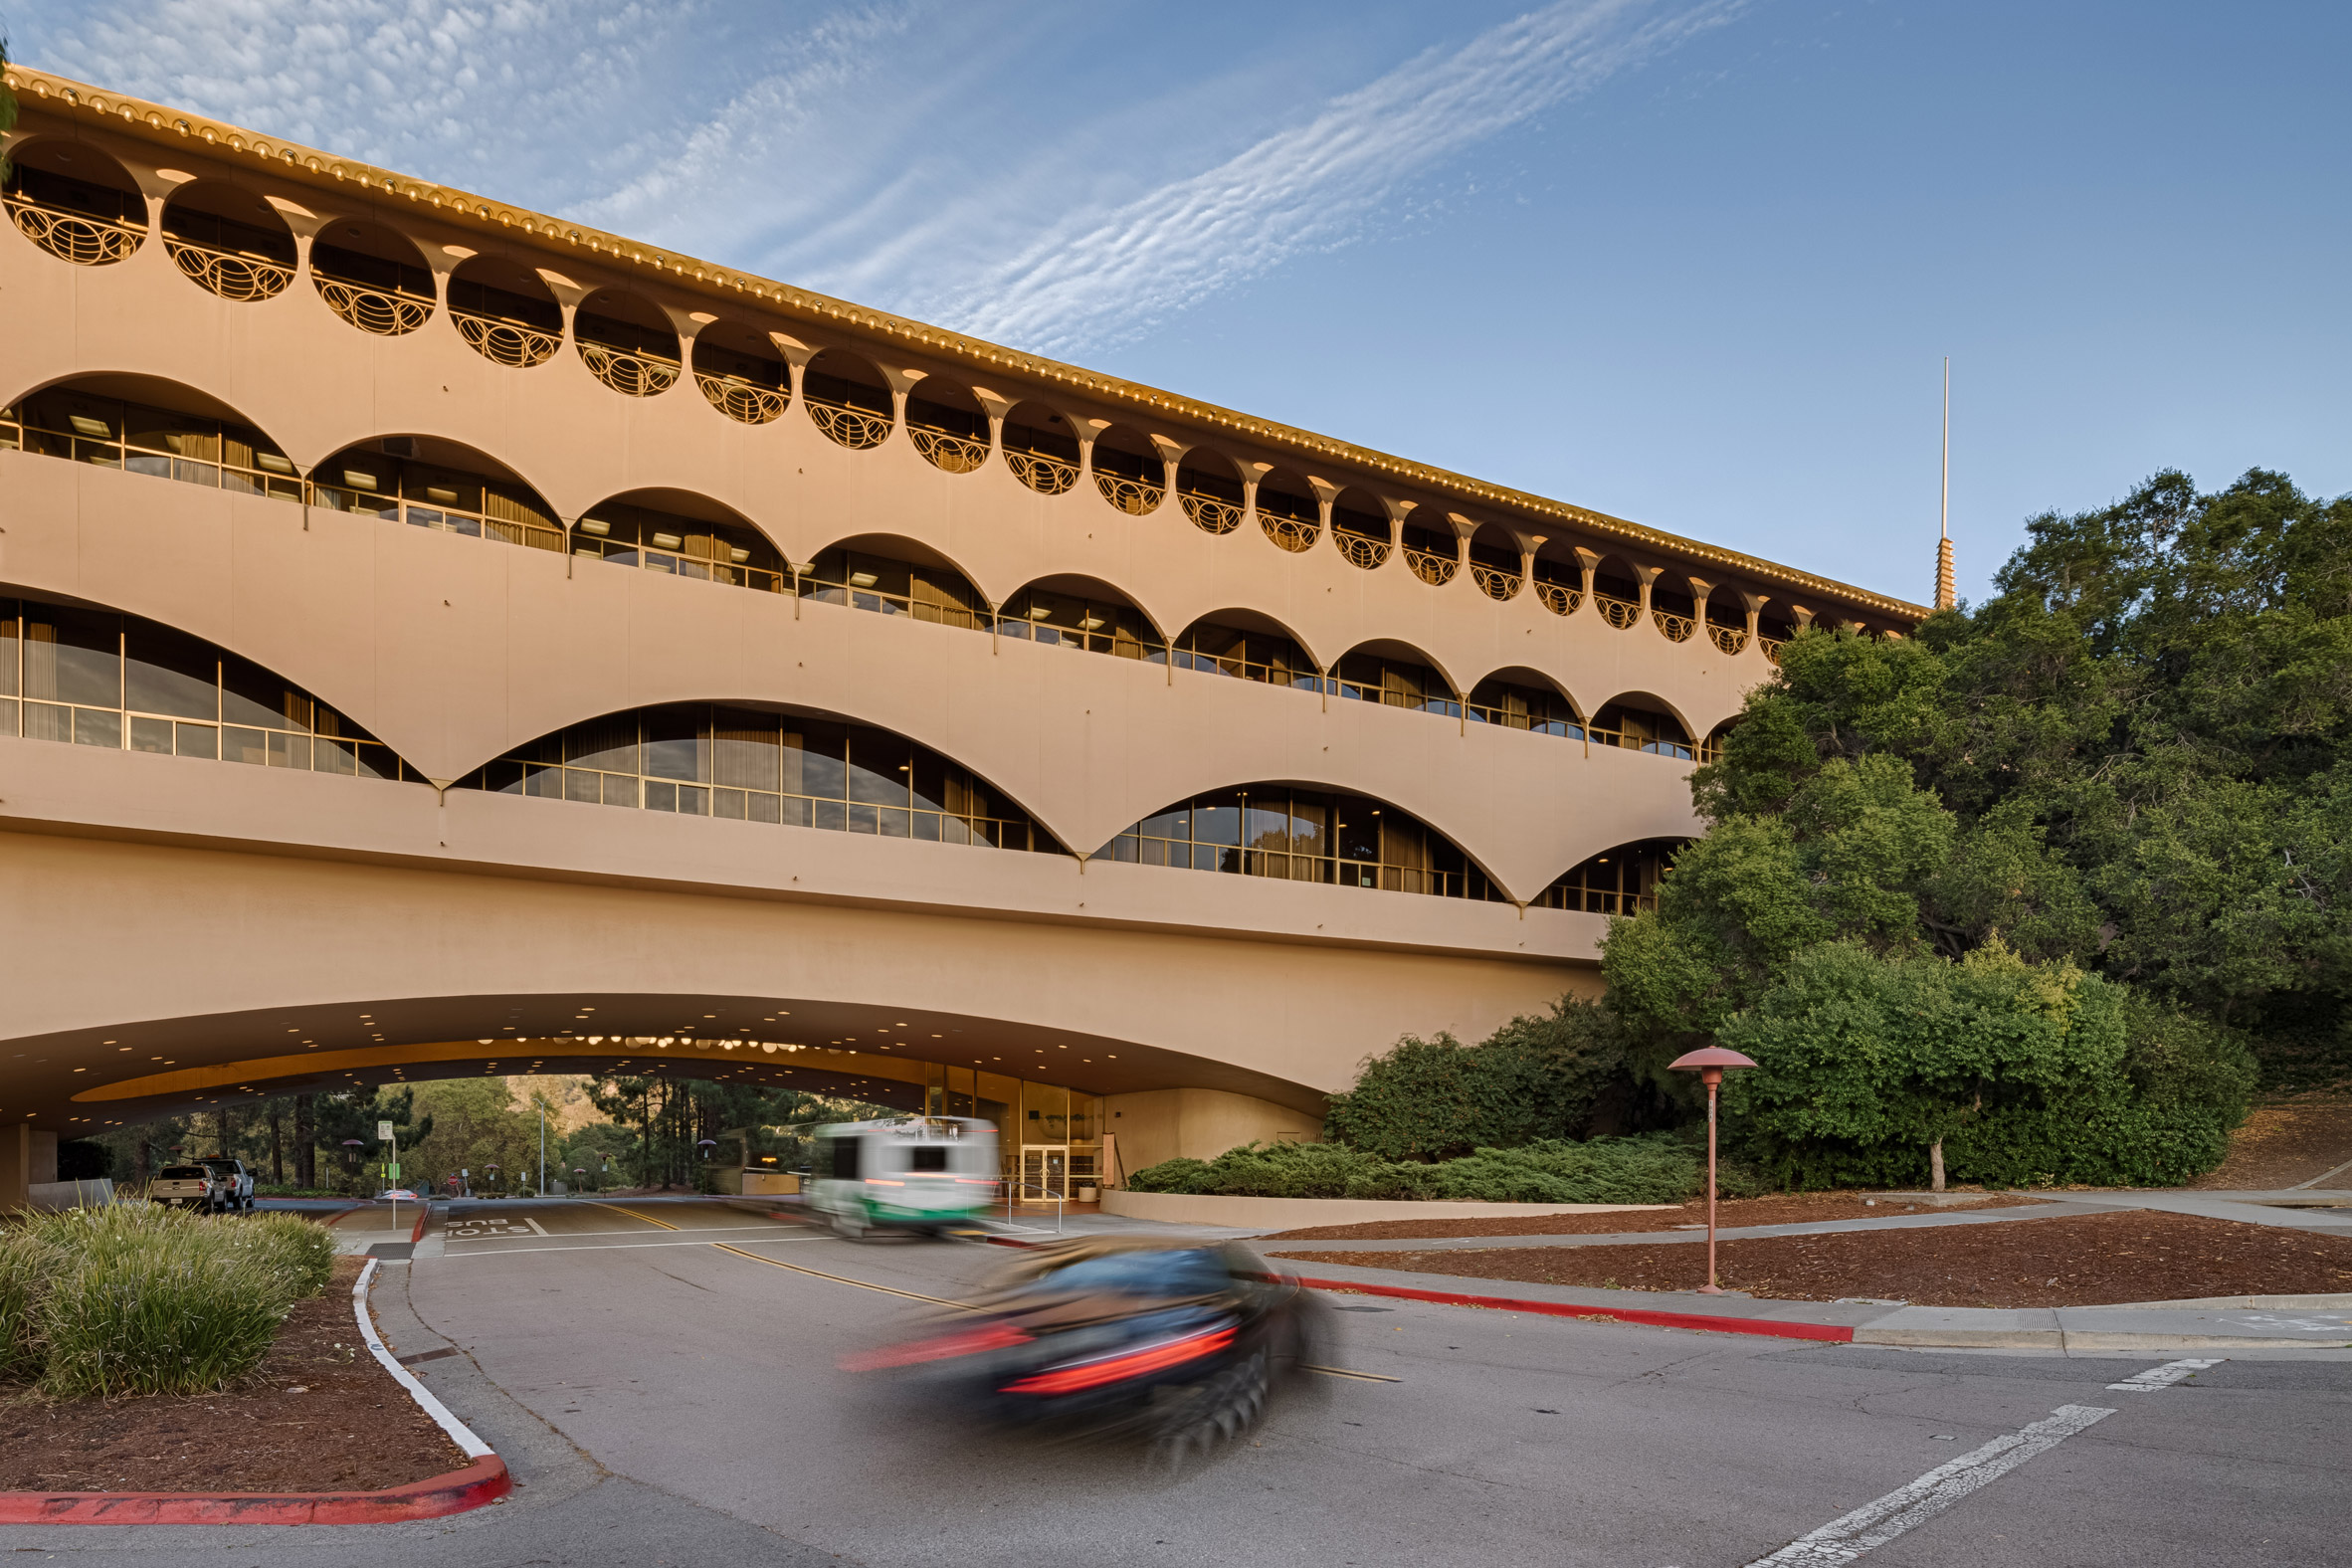 Frank Lloyd Wright's lesser-known designs are captured in new images-29